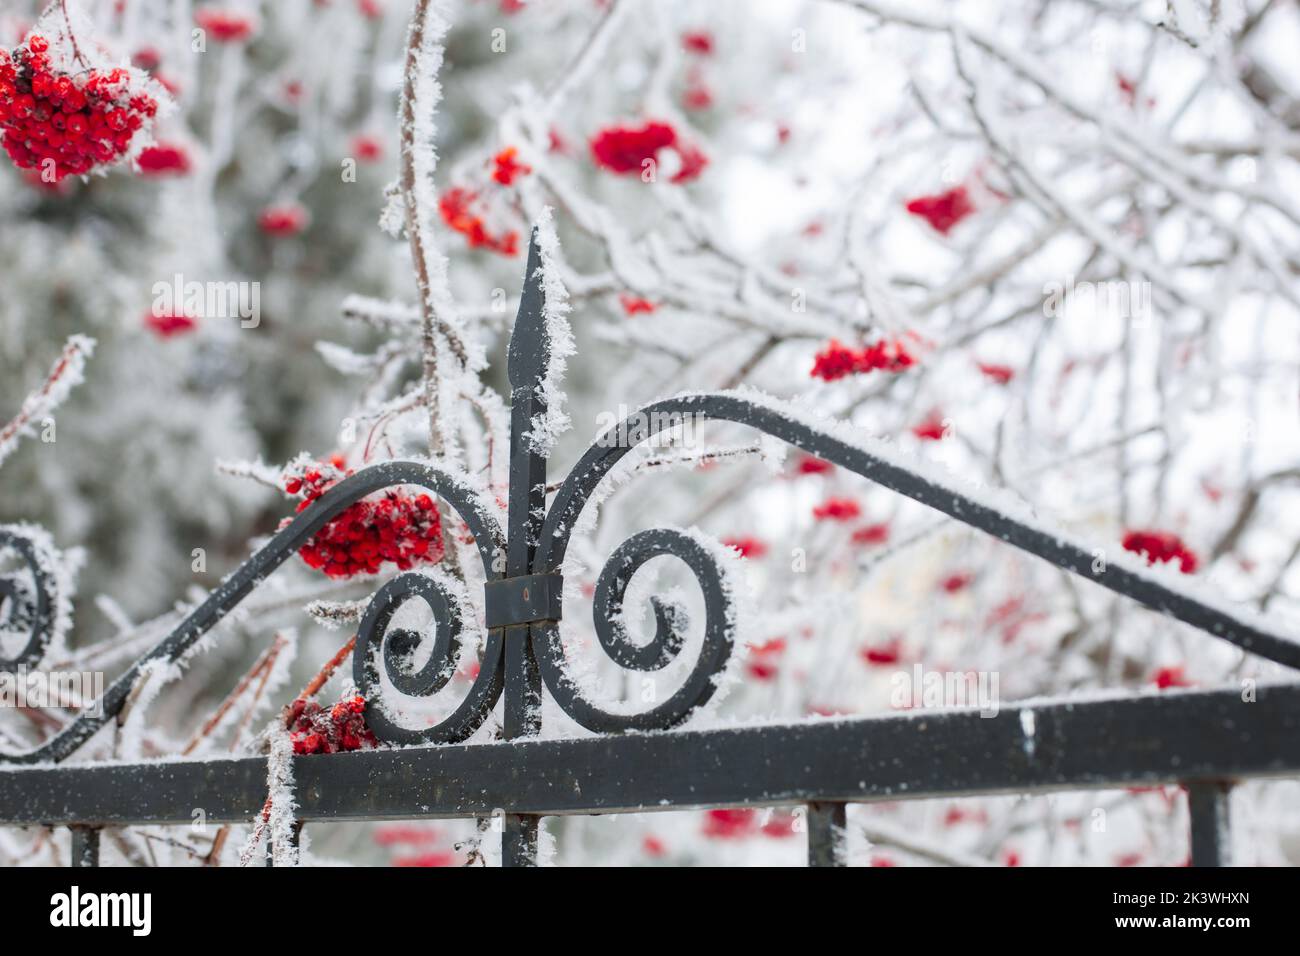 Close-up of iron bar fence of black color with twigs full of rowan berries covered with snow with tree branches in background in daytime. Gathering Stock Photo